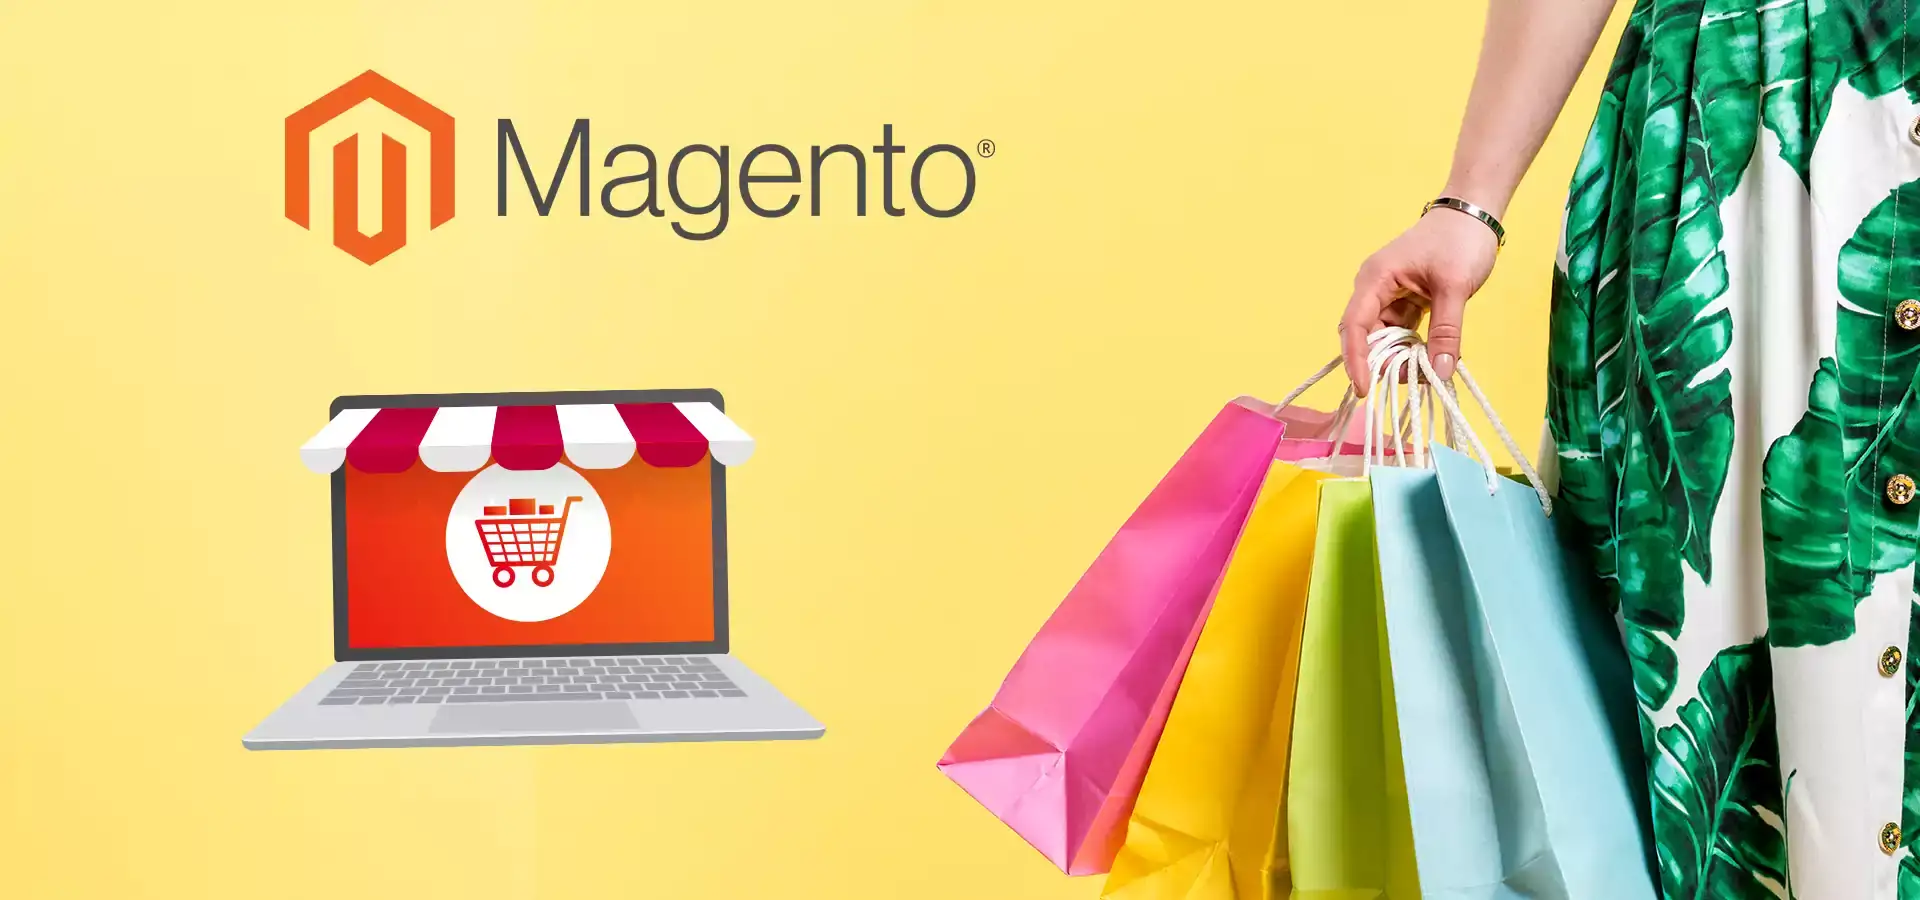 reasons-to-prove-that-magento-is-the-right-e-commerce-platform-related-blog-17